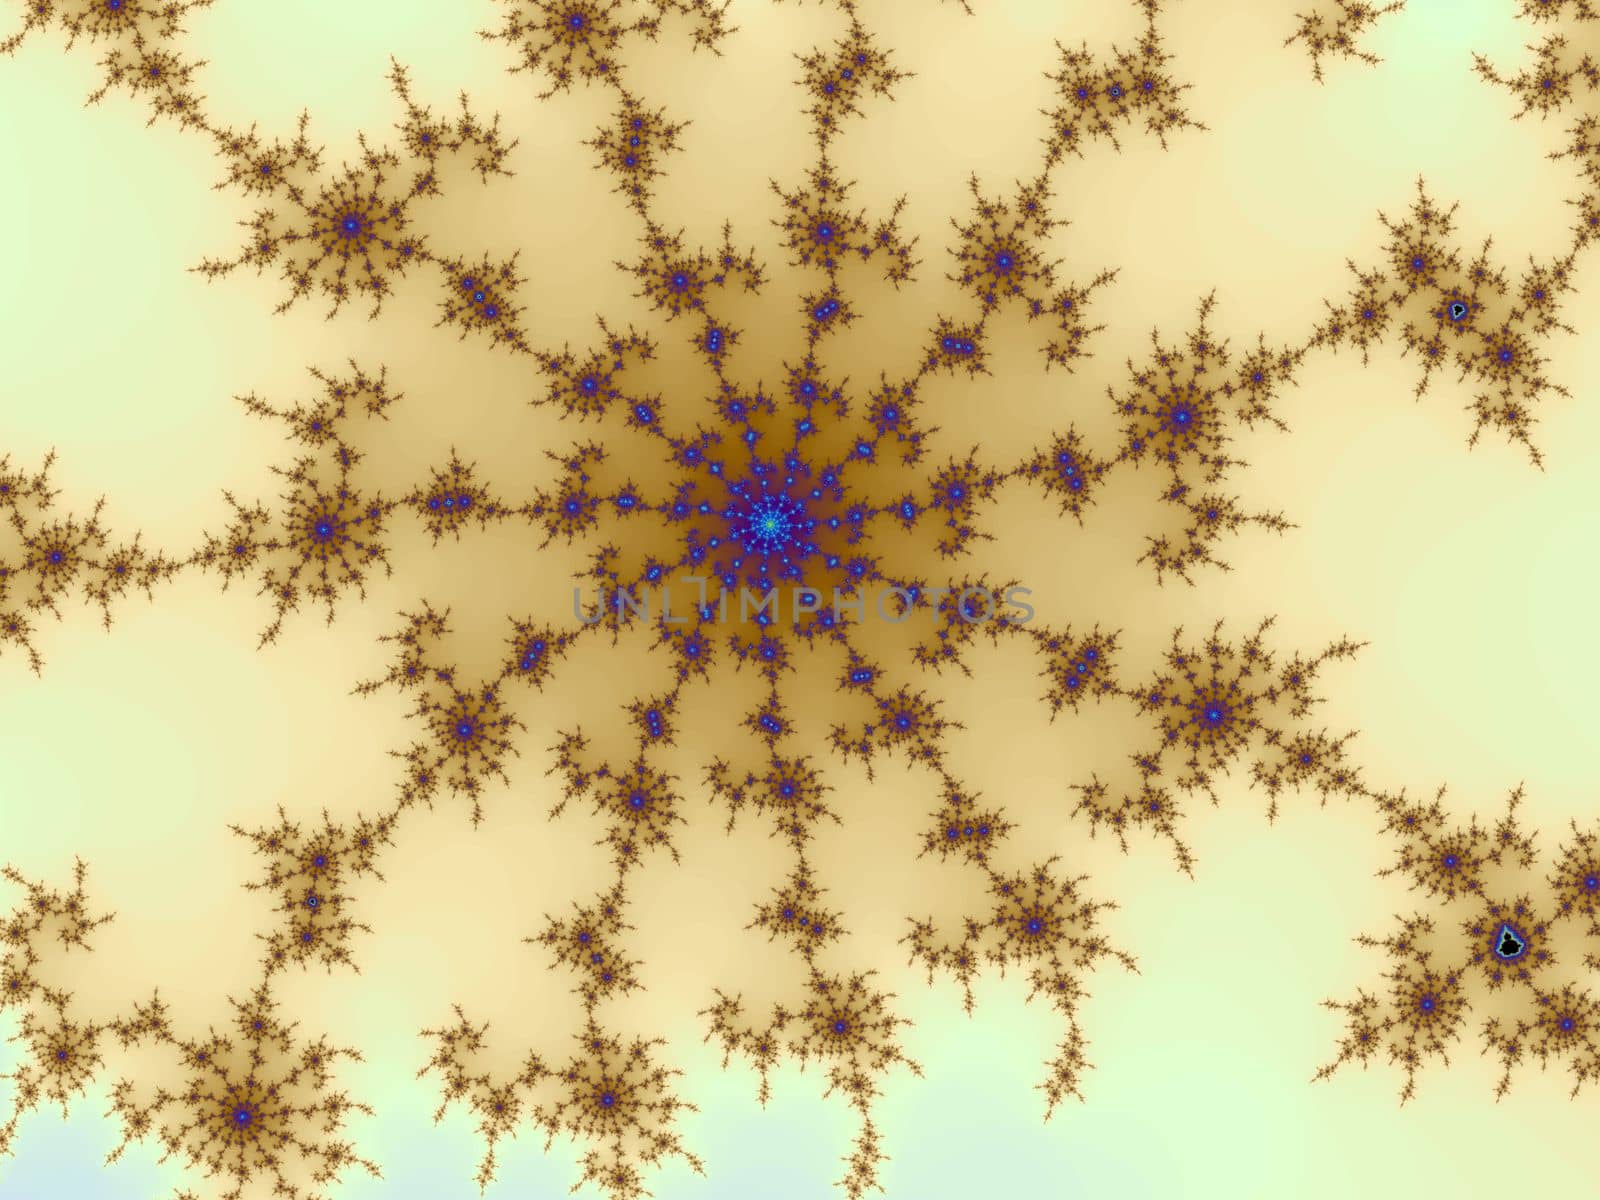 3D-Illustration of a beautiful zoom into the infinite mathematical mandelbrot set fractal